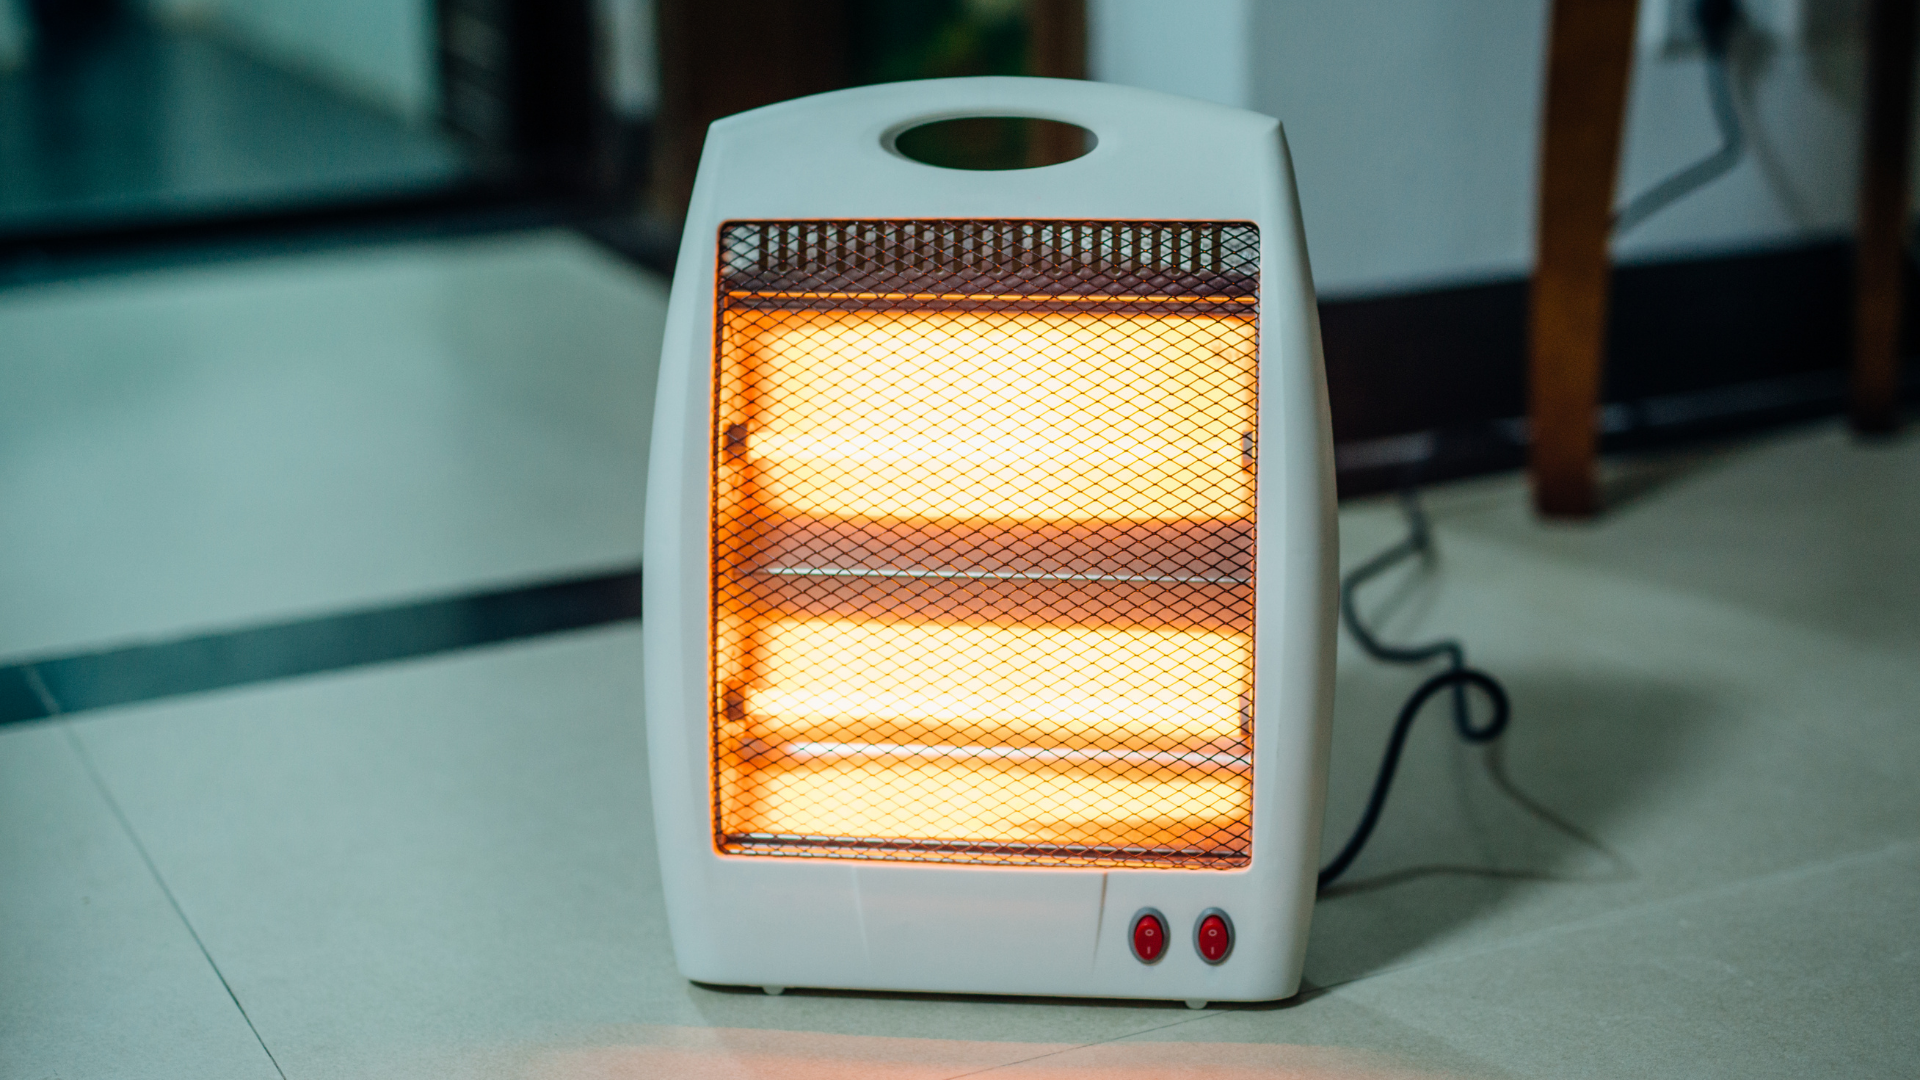 You are currently viewing 5 BEST Heaters For Tiny House in 2021